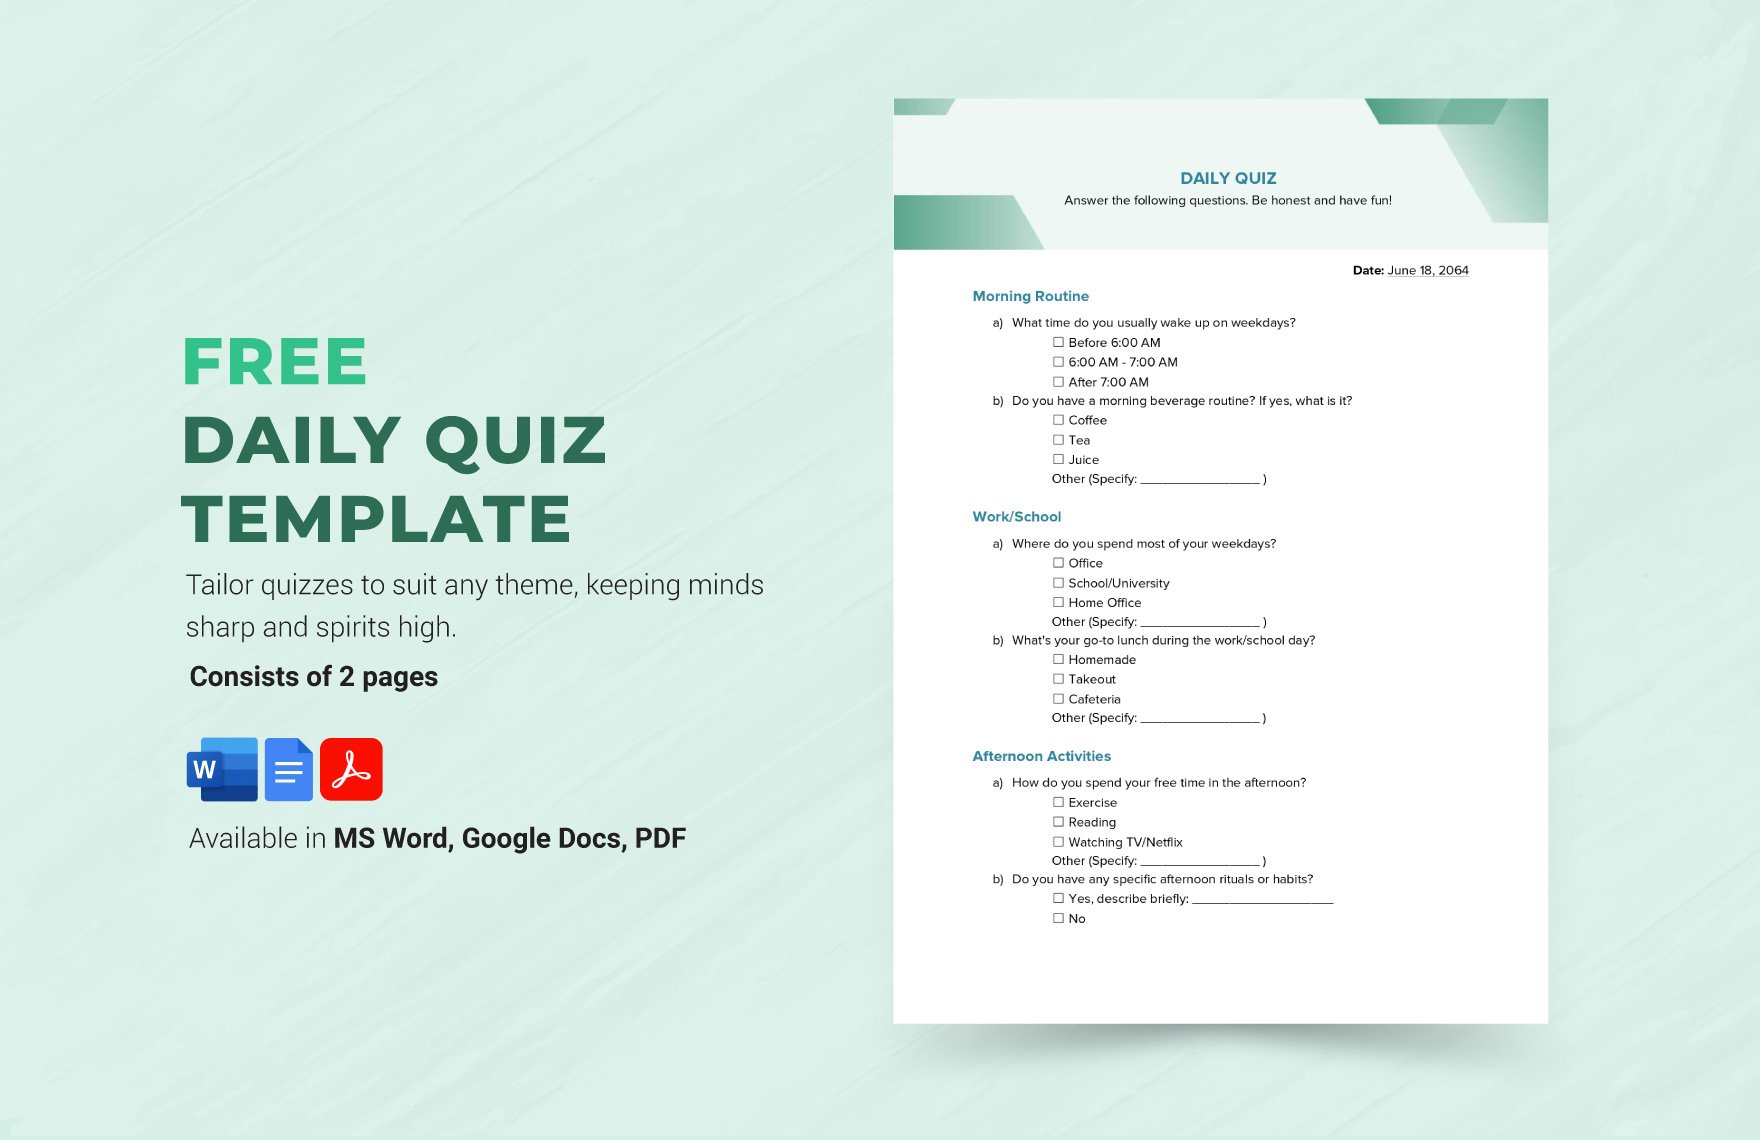 Free Daily Quiz Template in Word, Google Docs, PDF